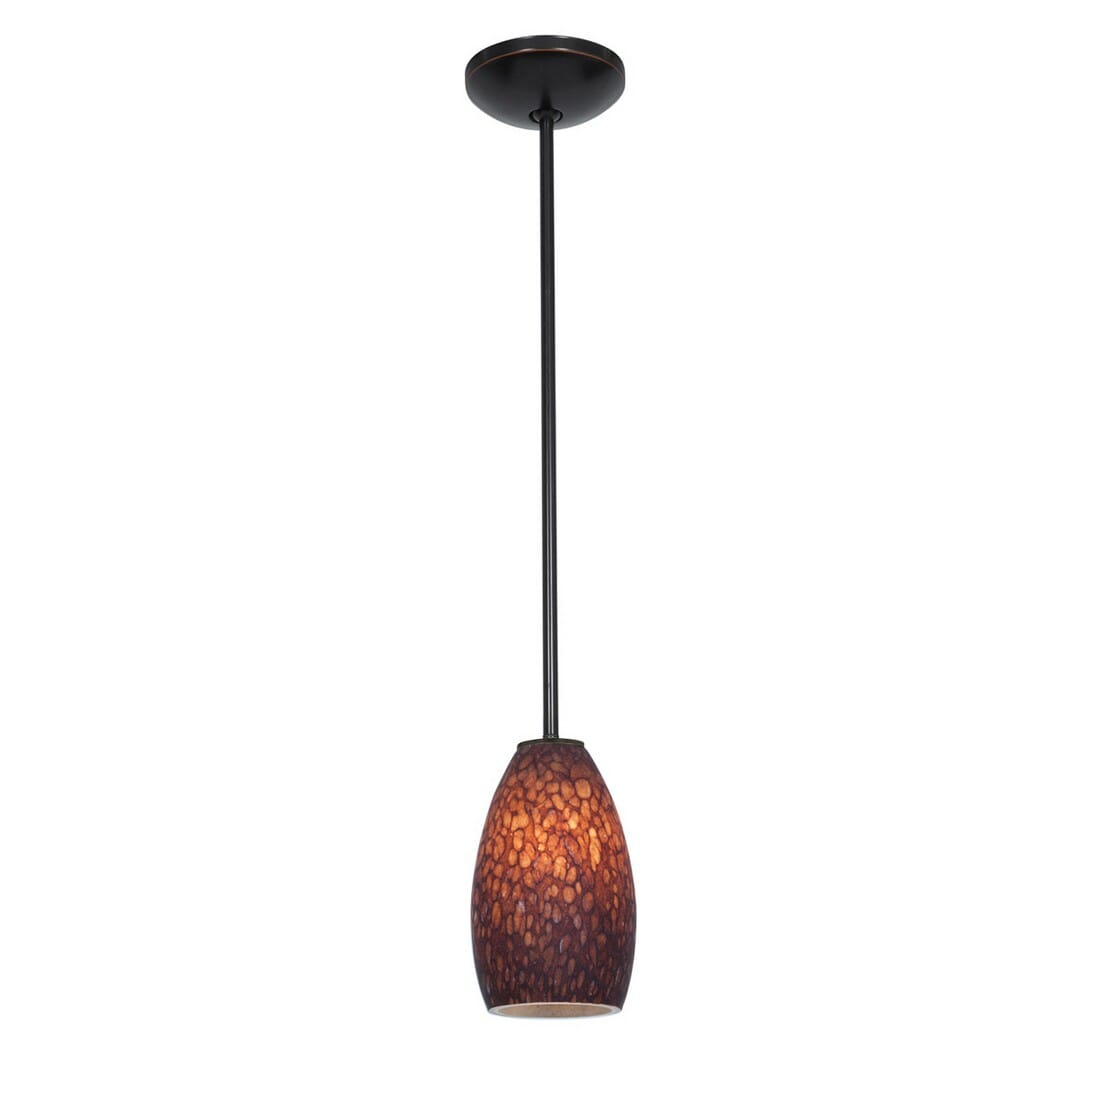 Access Champagne Pendant Light in Oil Rubbed Bronze -  Access Lighting, 28012-1R-ORB/BRST